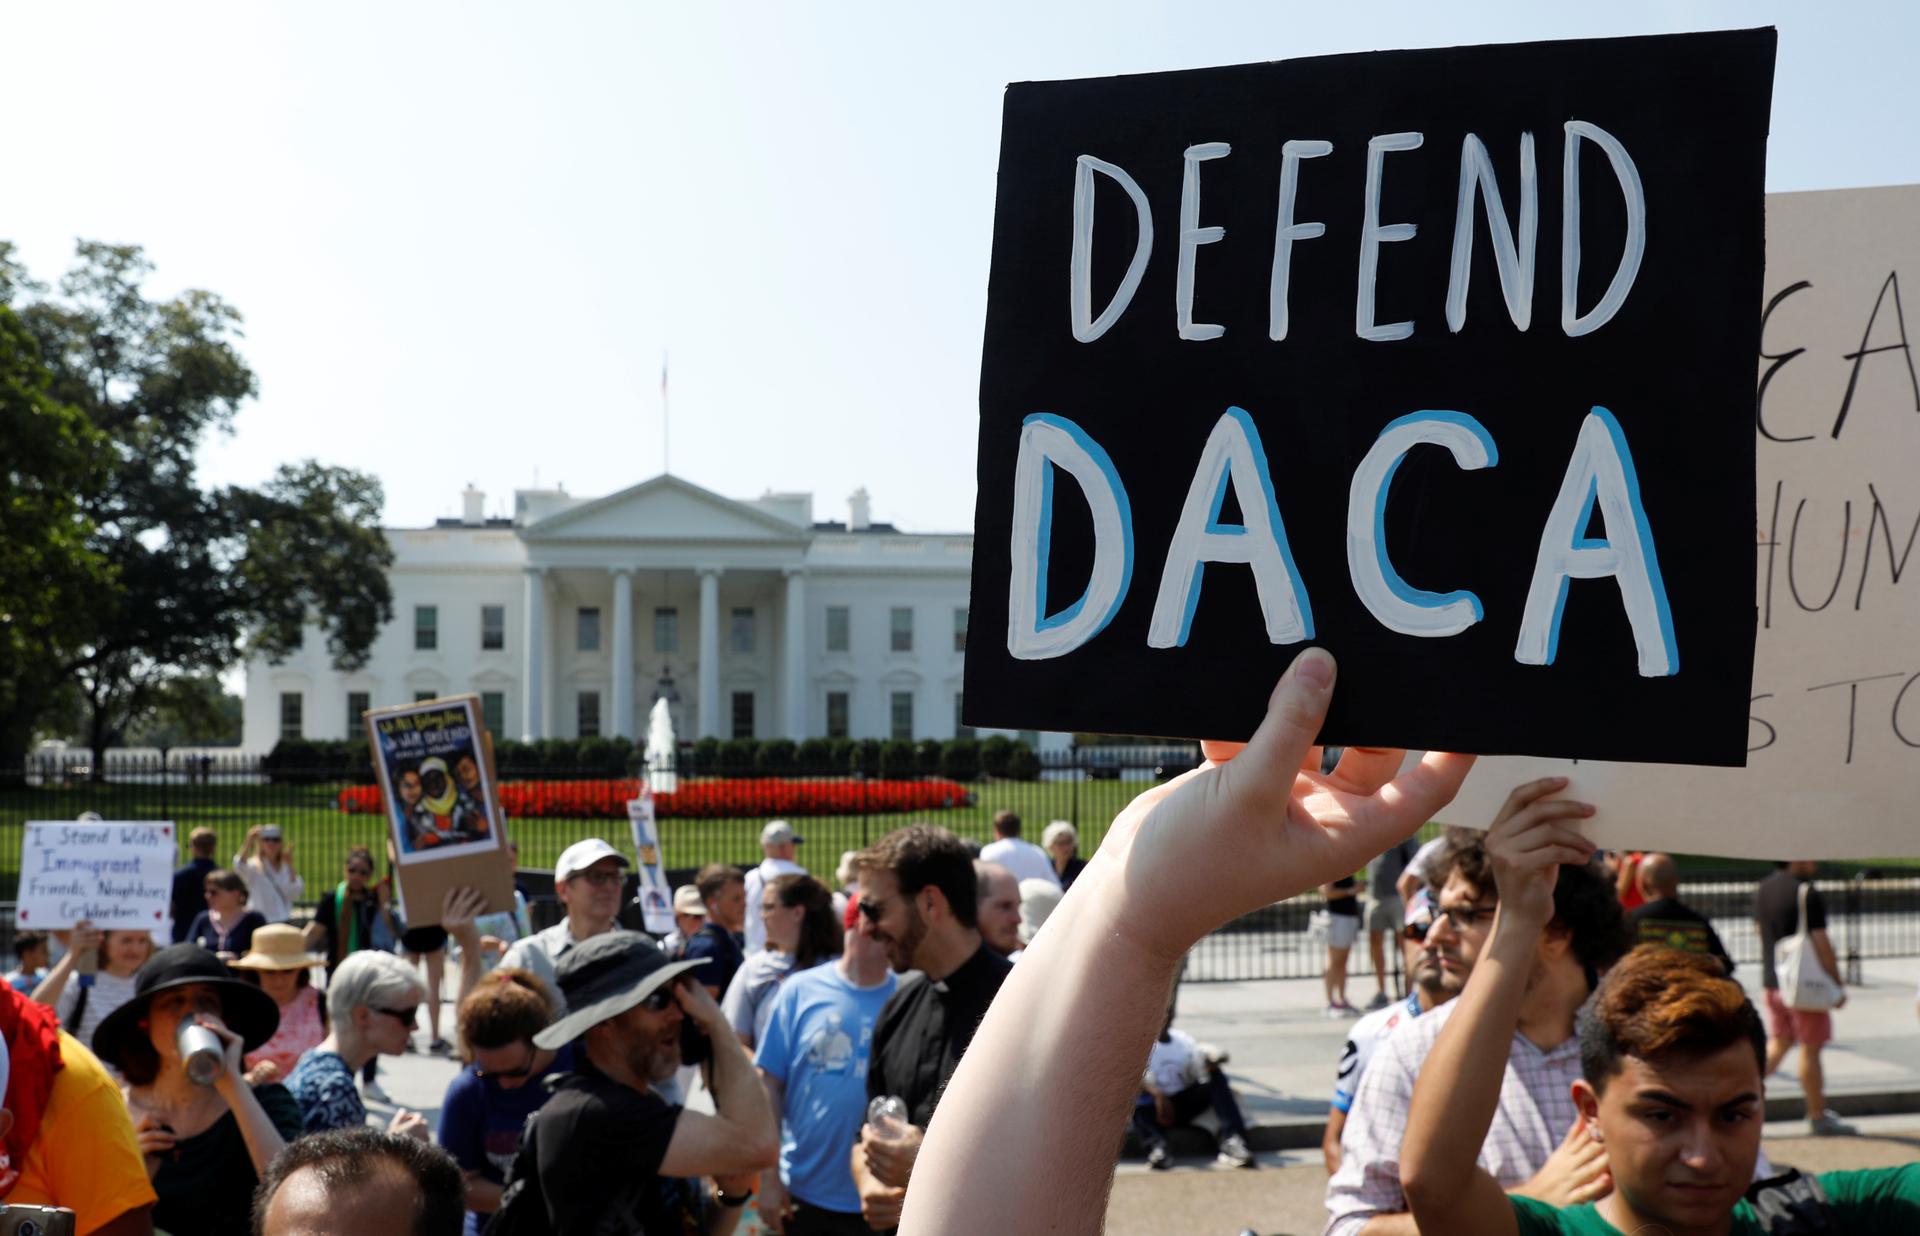 Demonstrators protest in front of the White House after the Trump administration today scrapped the Deferred Action for Childhood Arrivals (DACA).